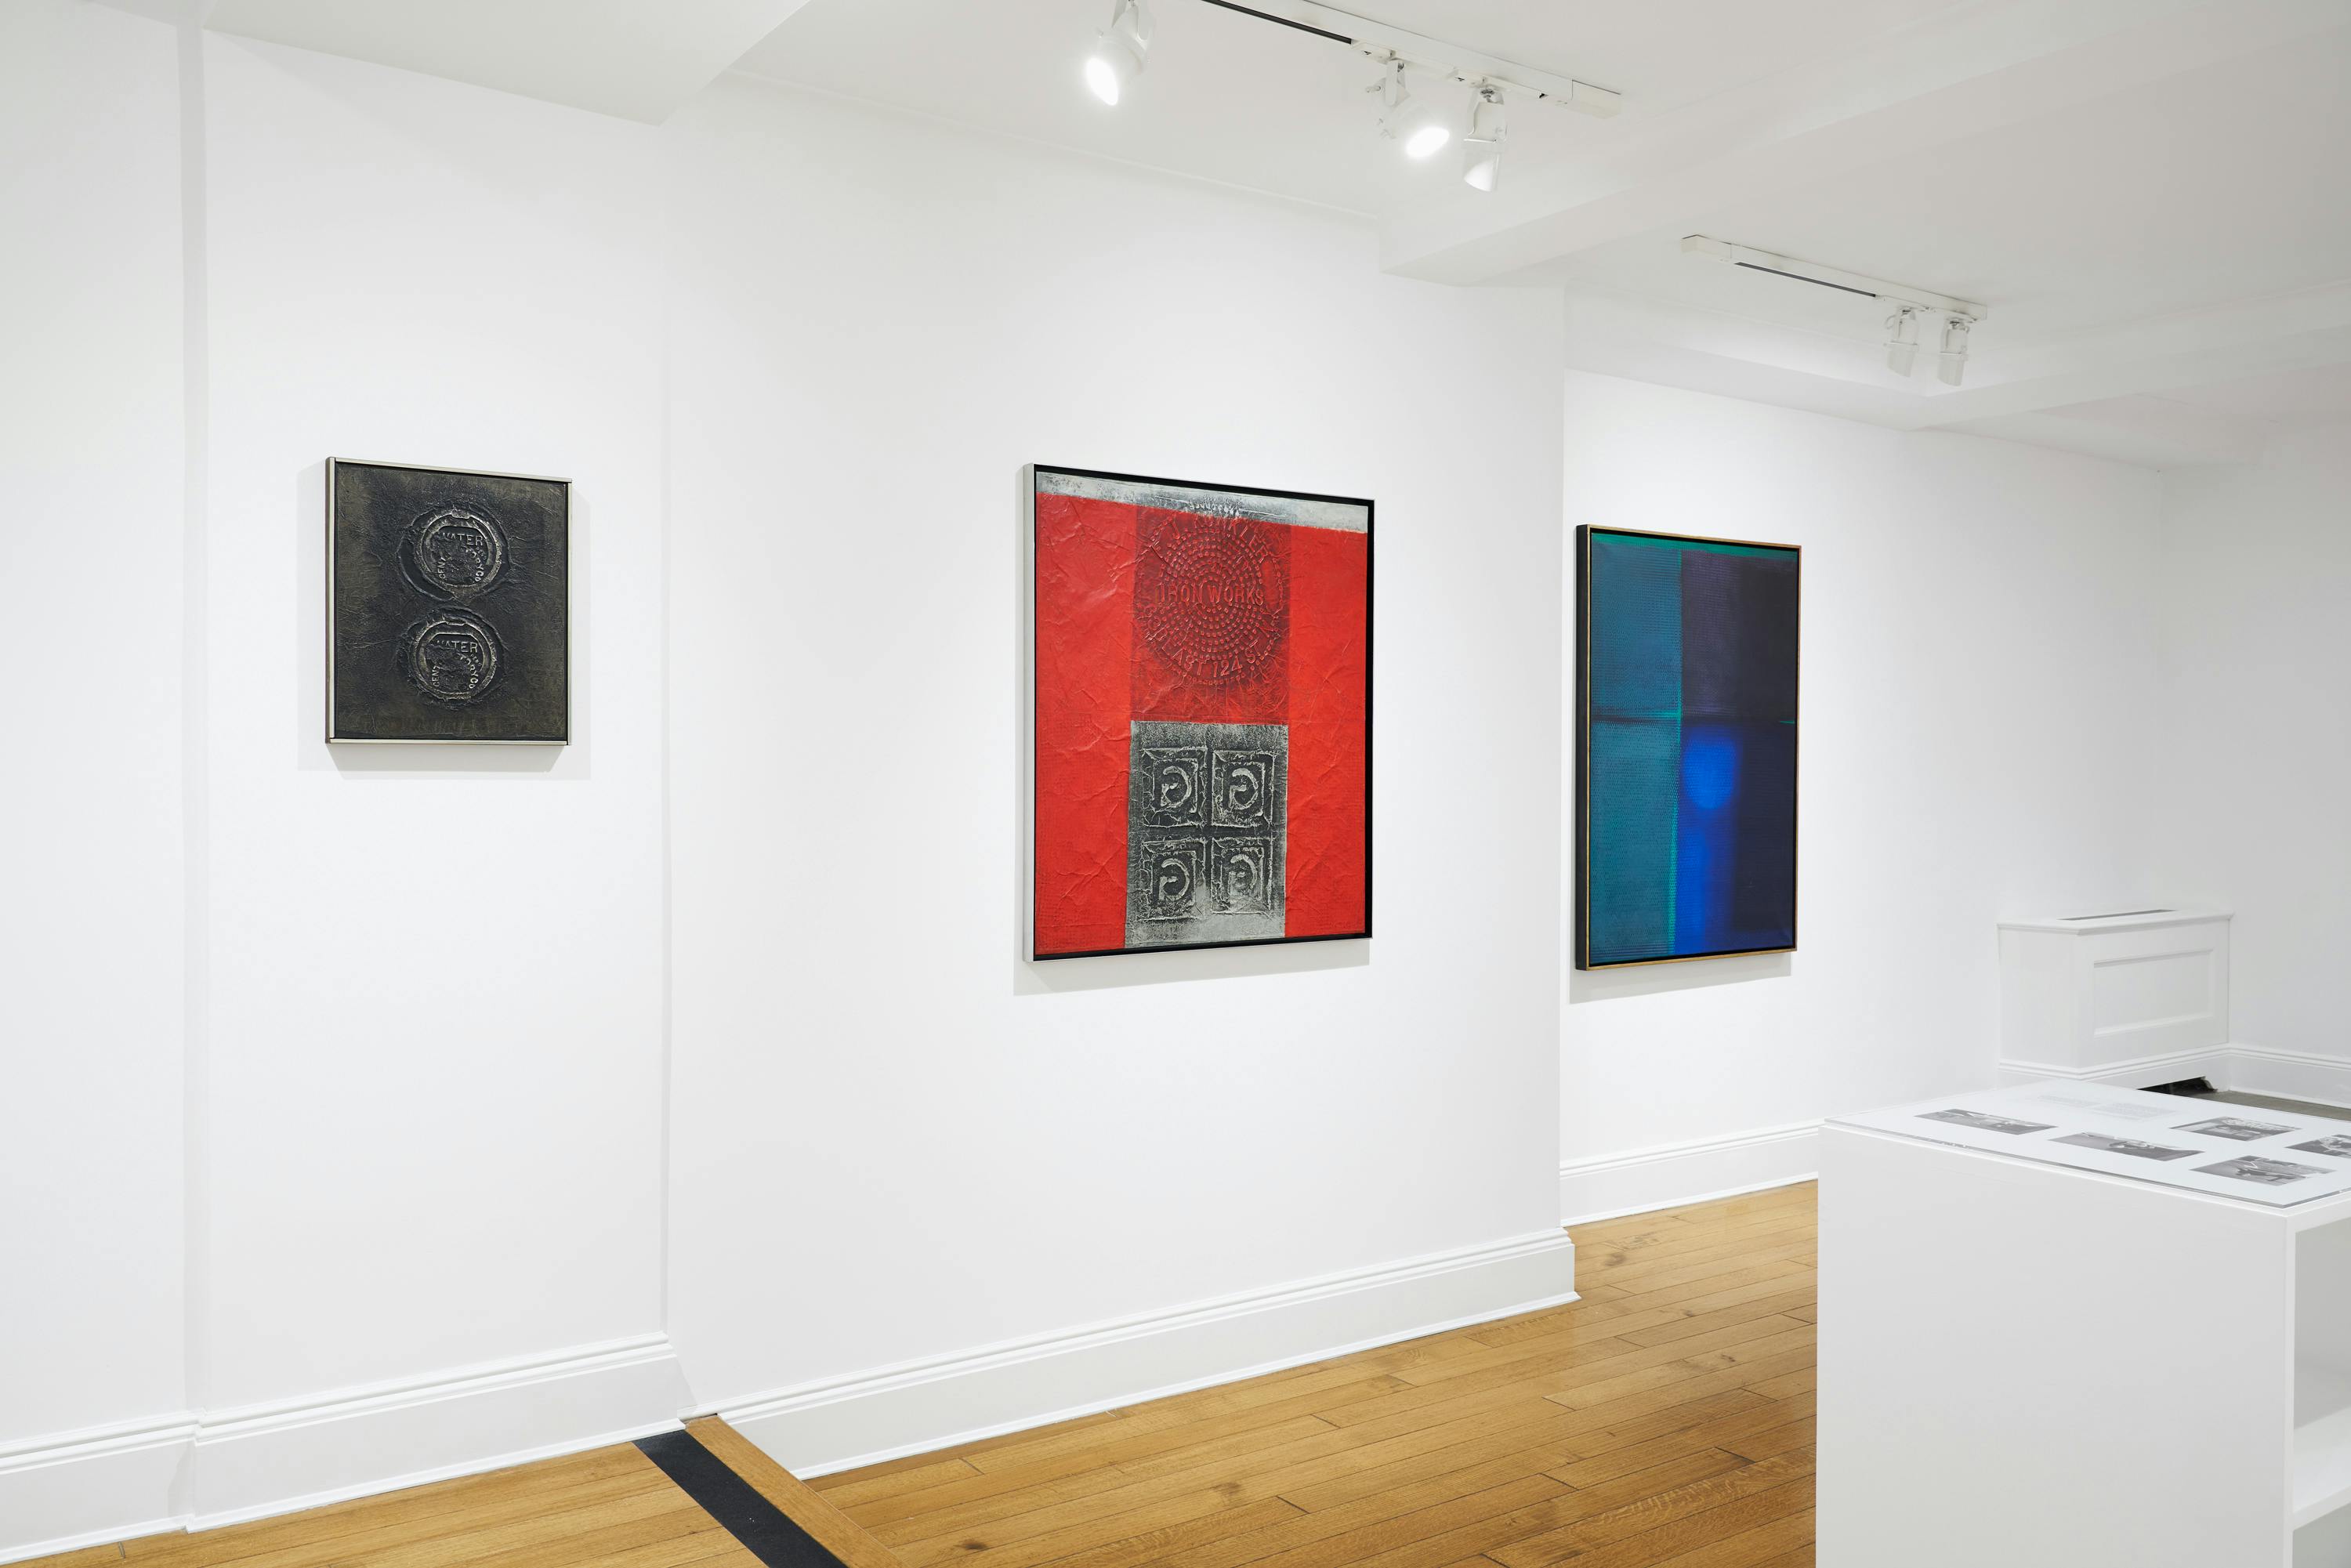 Installation view of José Antonio Fernández-Muro: Geometry in Transfer exhibition showing three paintings and one vitrine.